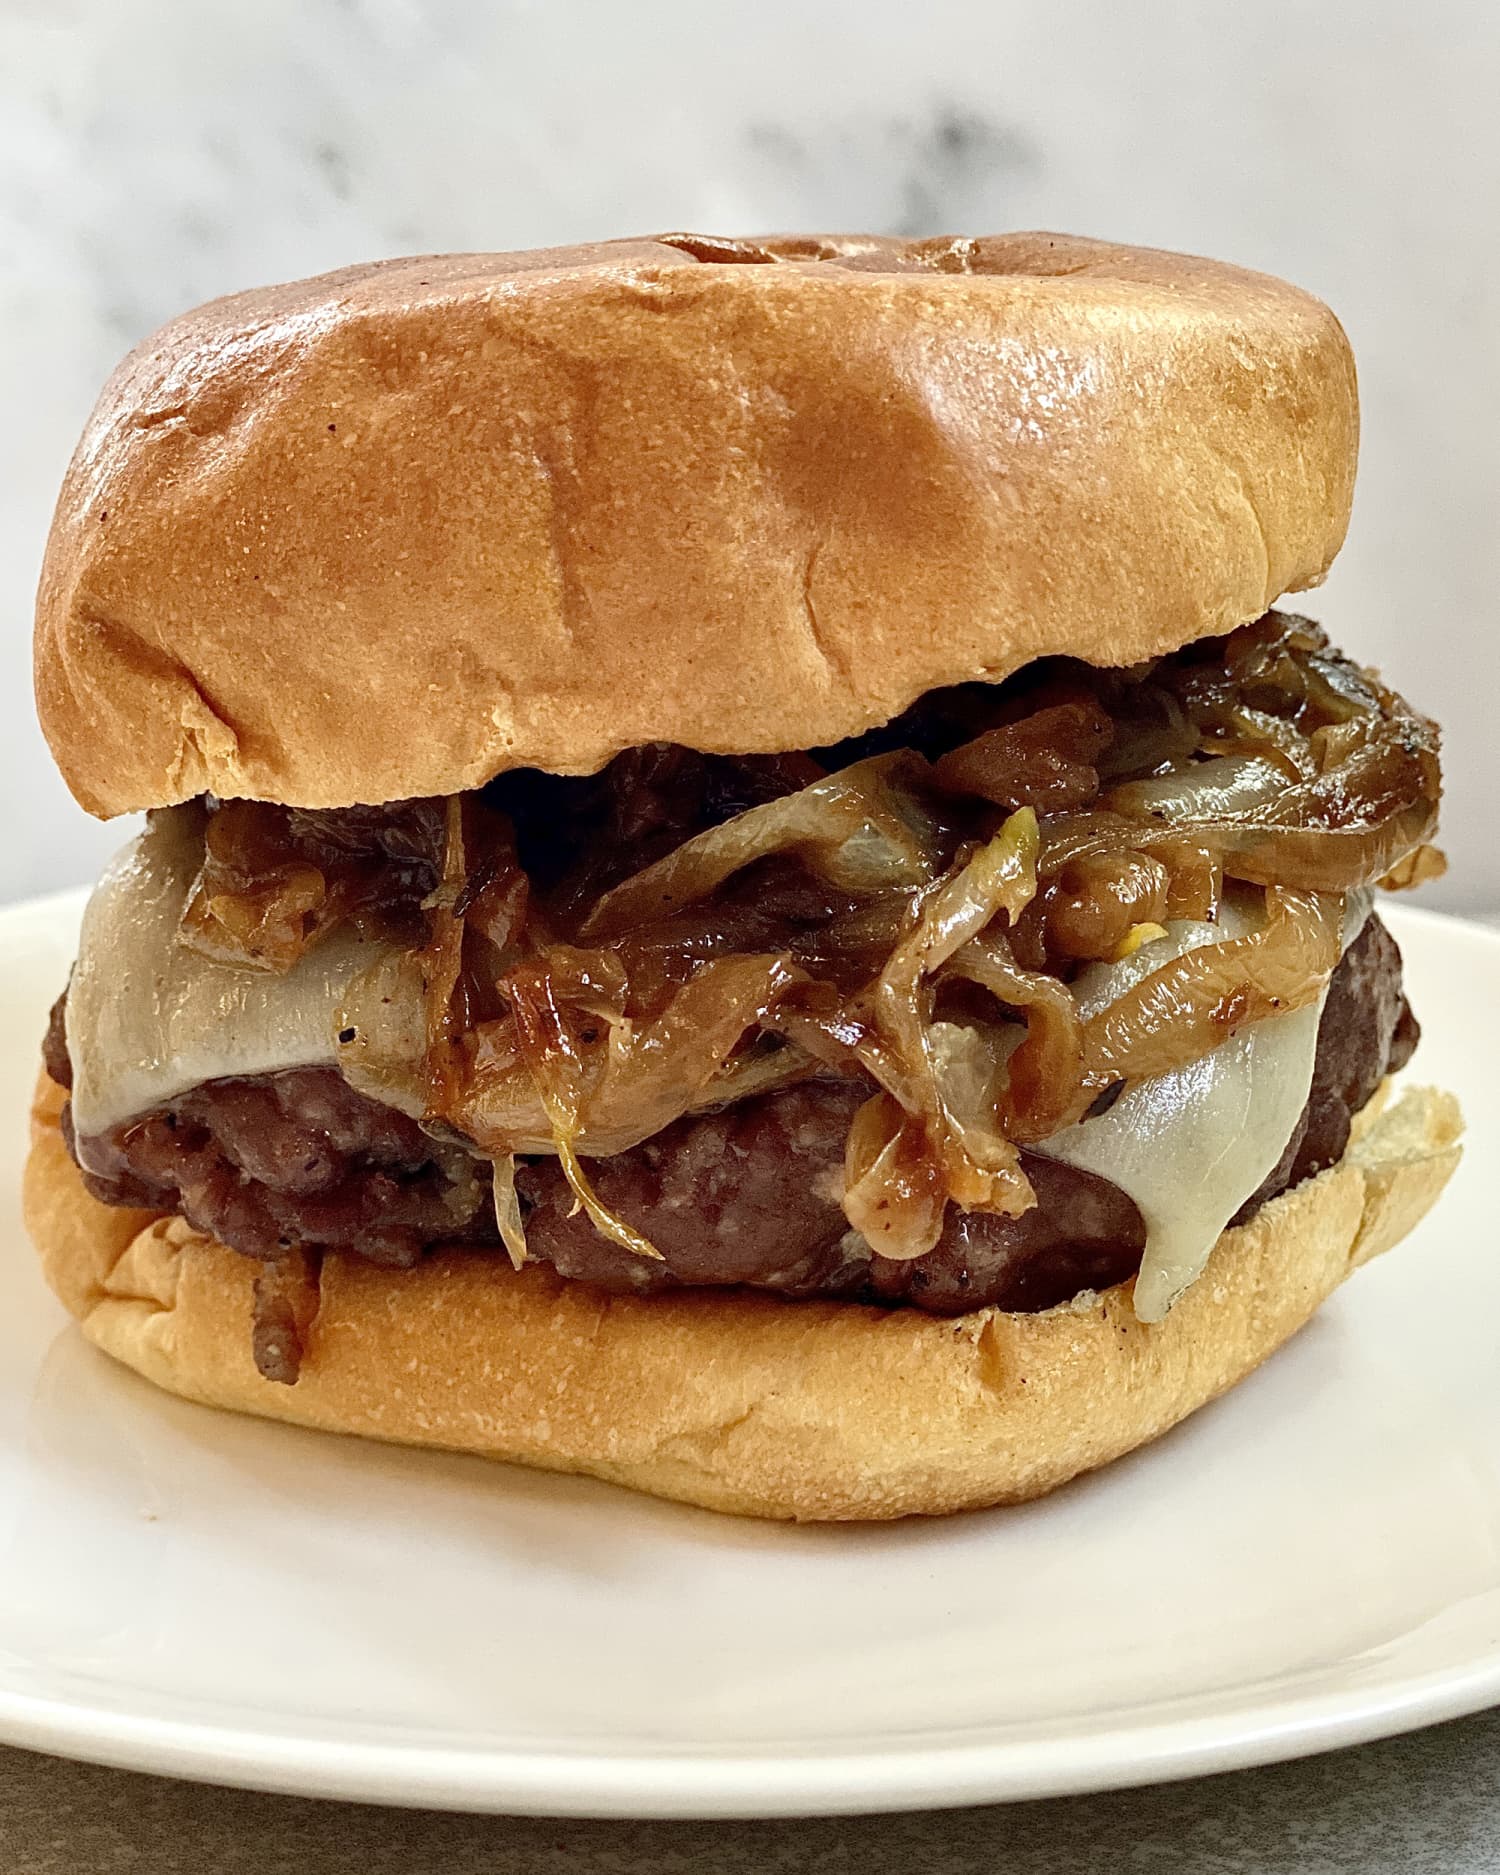 French Onion Burgers Reinvent My Family’s Favorite Dinner